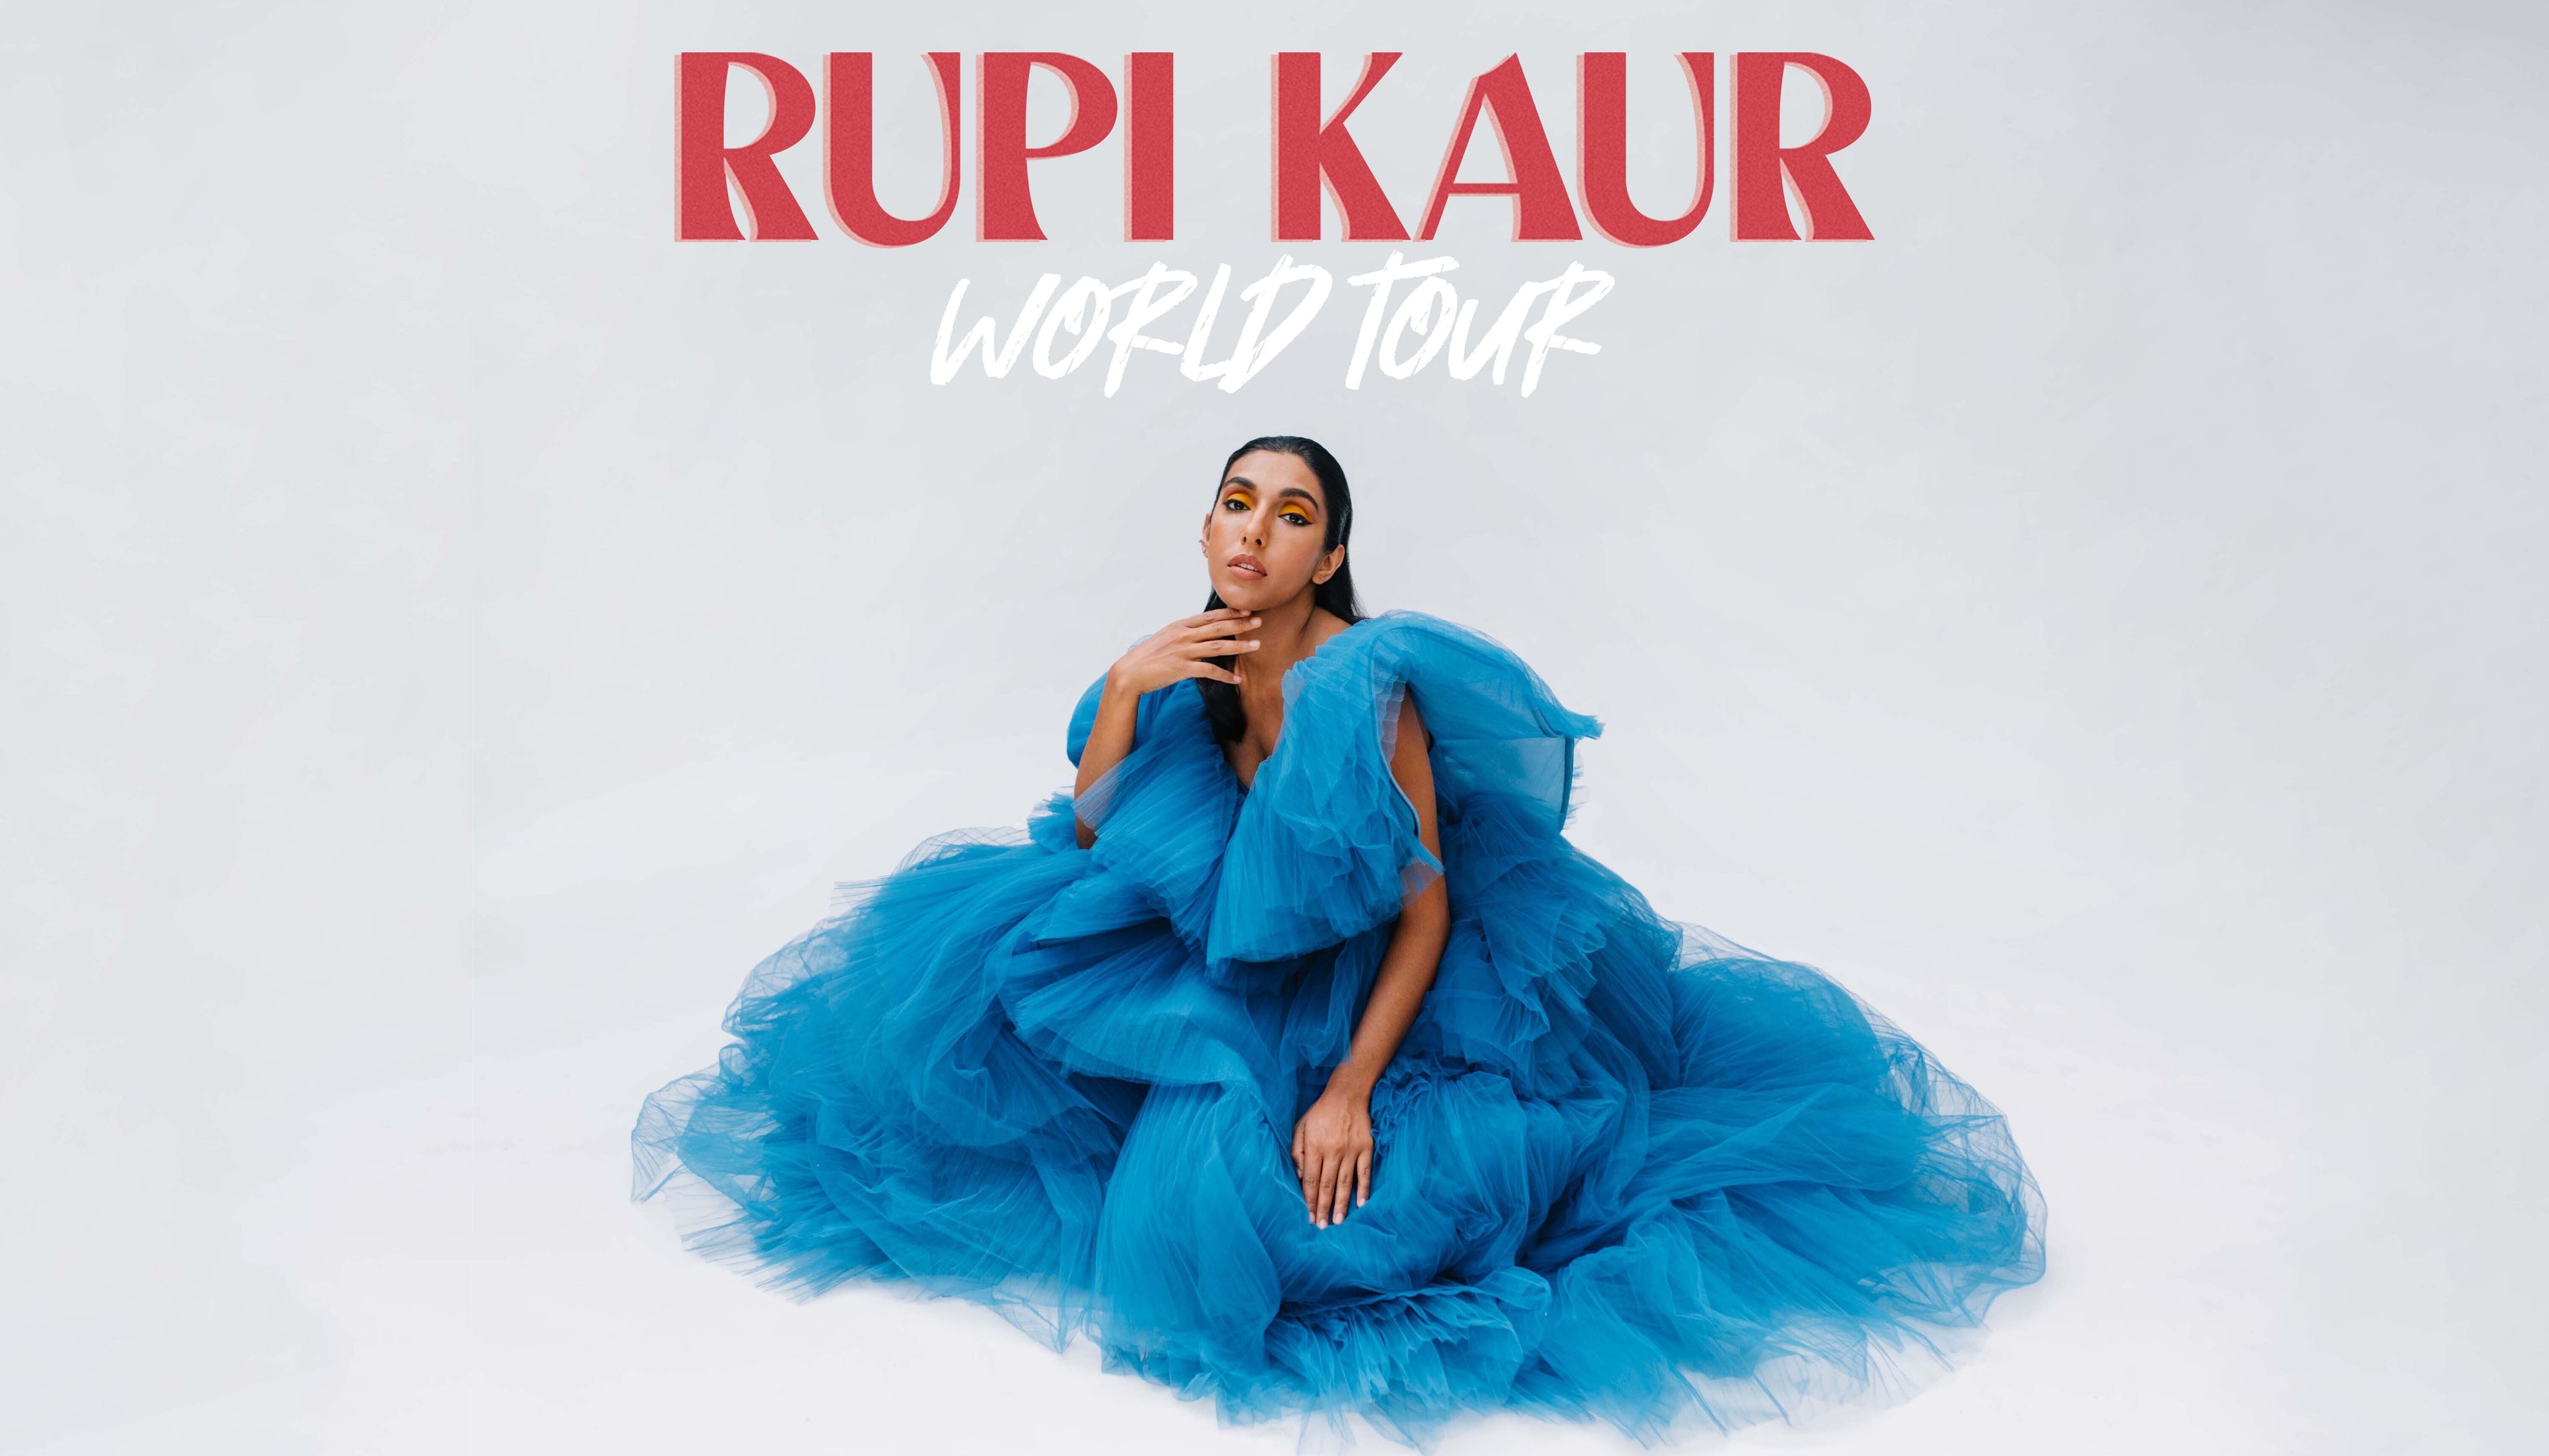 Rupi Kaur schedule, dates, events, and tickets - AXS